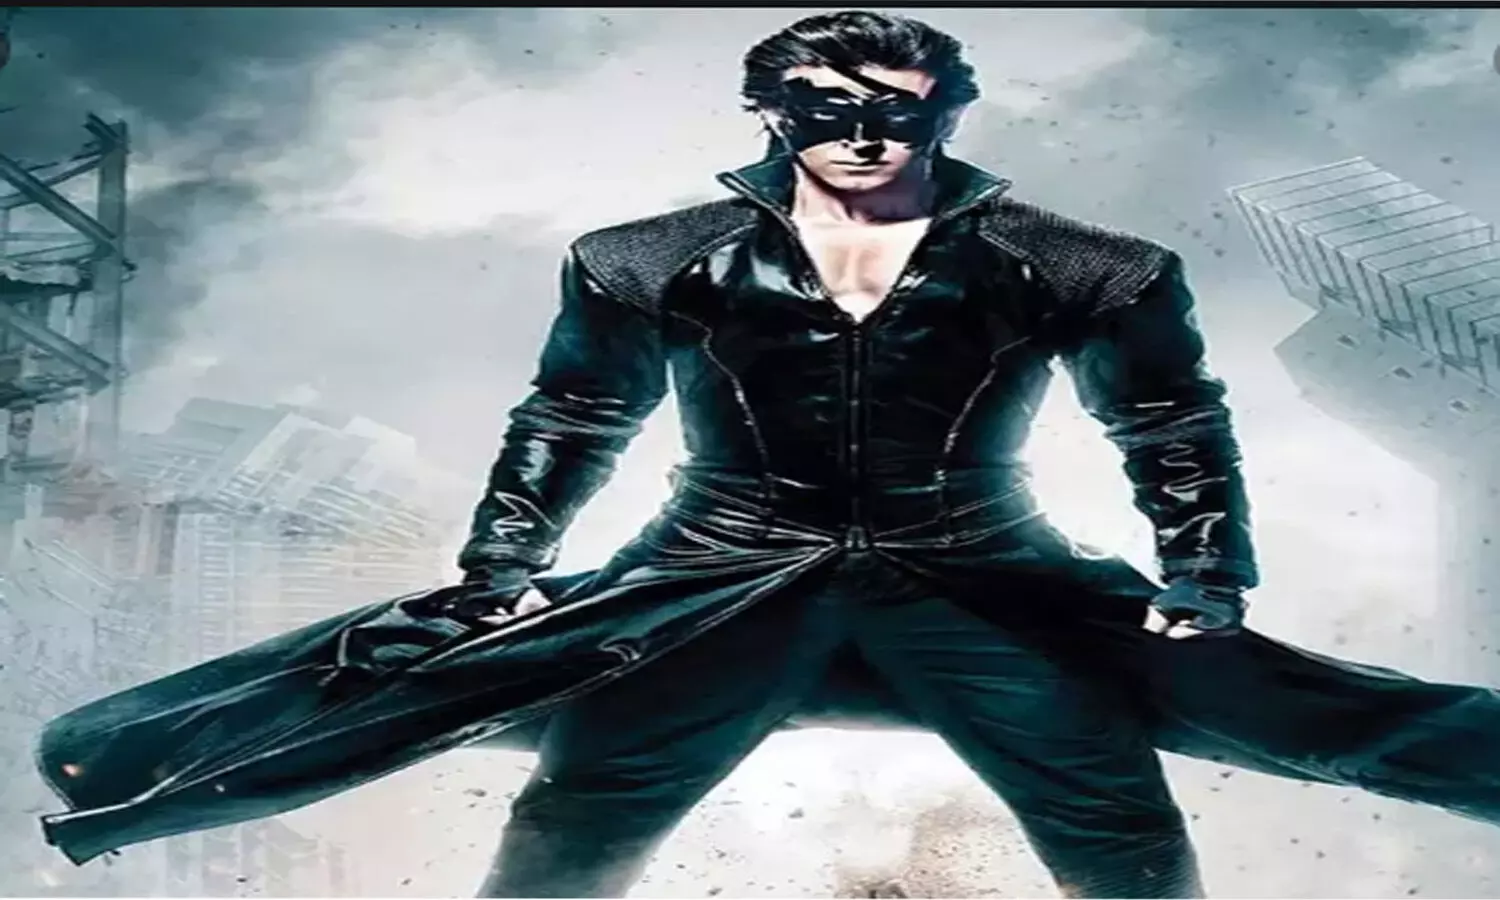 Hrithik Roshan announces KRRISH 4, says Lets see what the future brings